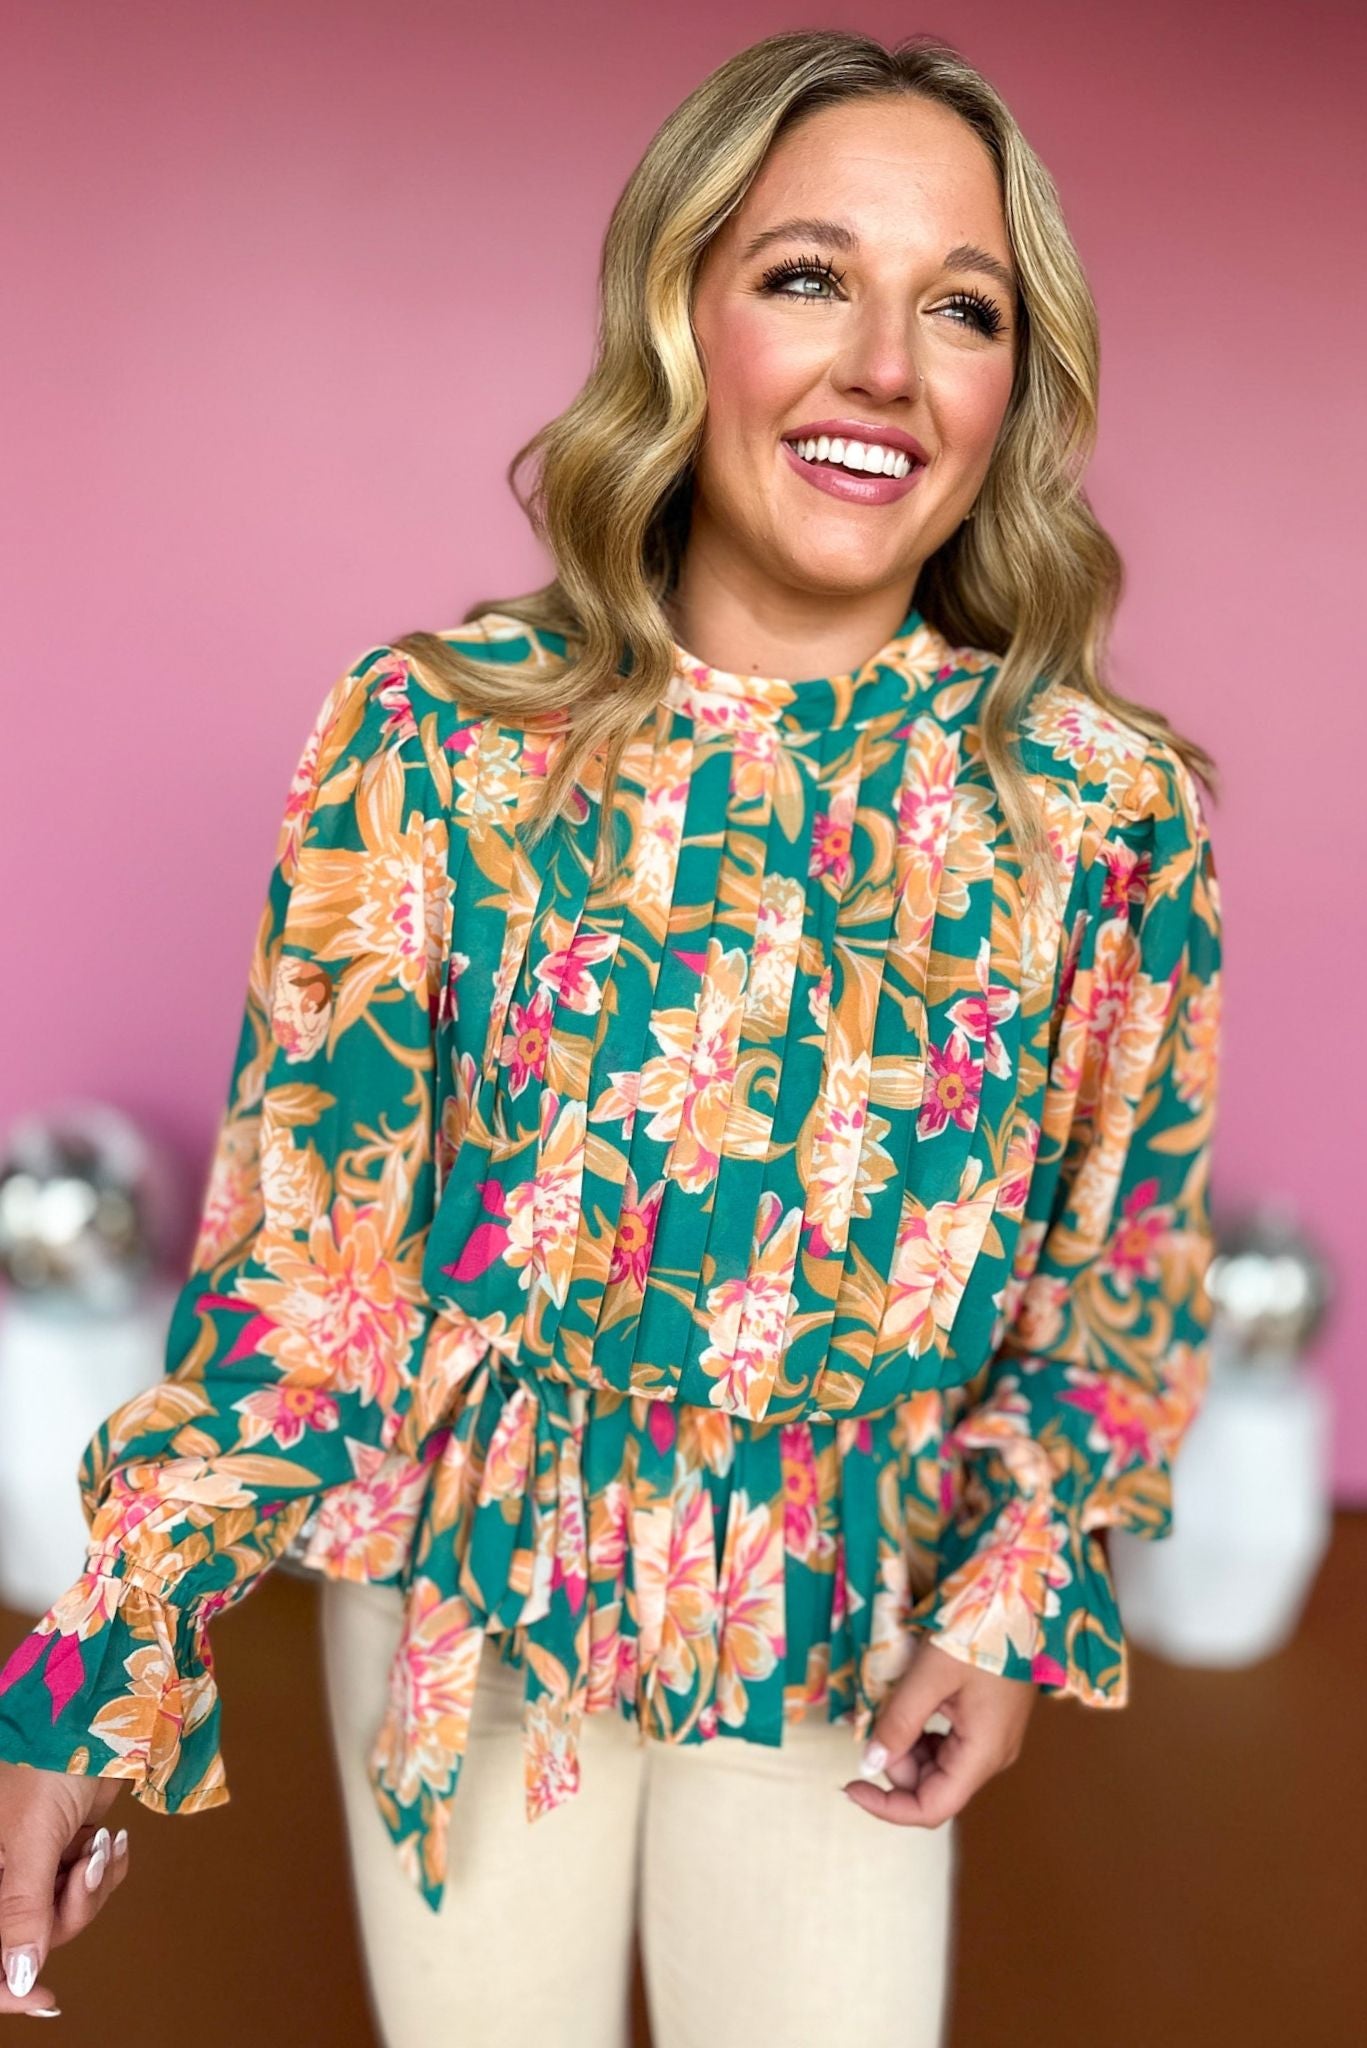 Teal Green Floral Printed High Neck Pleated Tie Waist Top, must have top, must have style, must have fall, fall collection, fall fashion, elevated style, elevated top, mom style, fall style, shop style your senses by mallory fitzsimmons